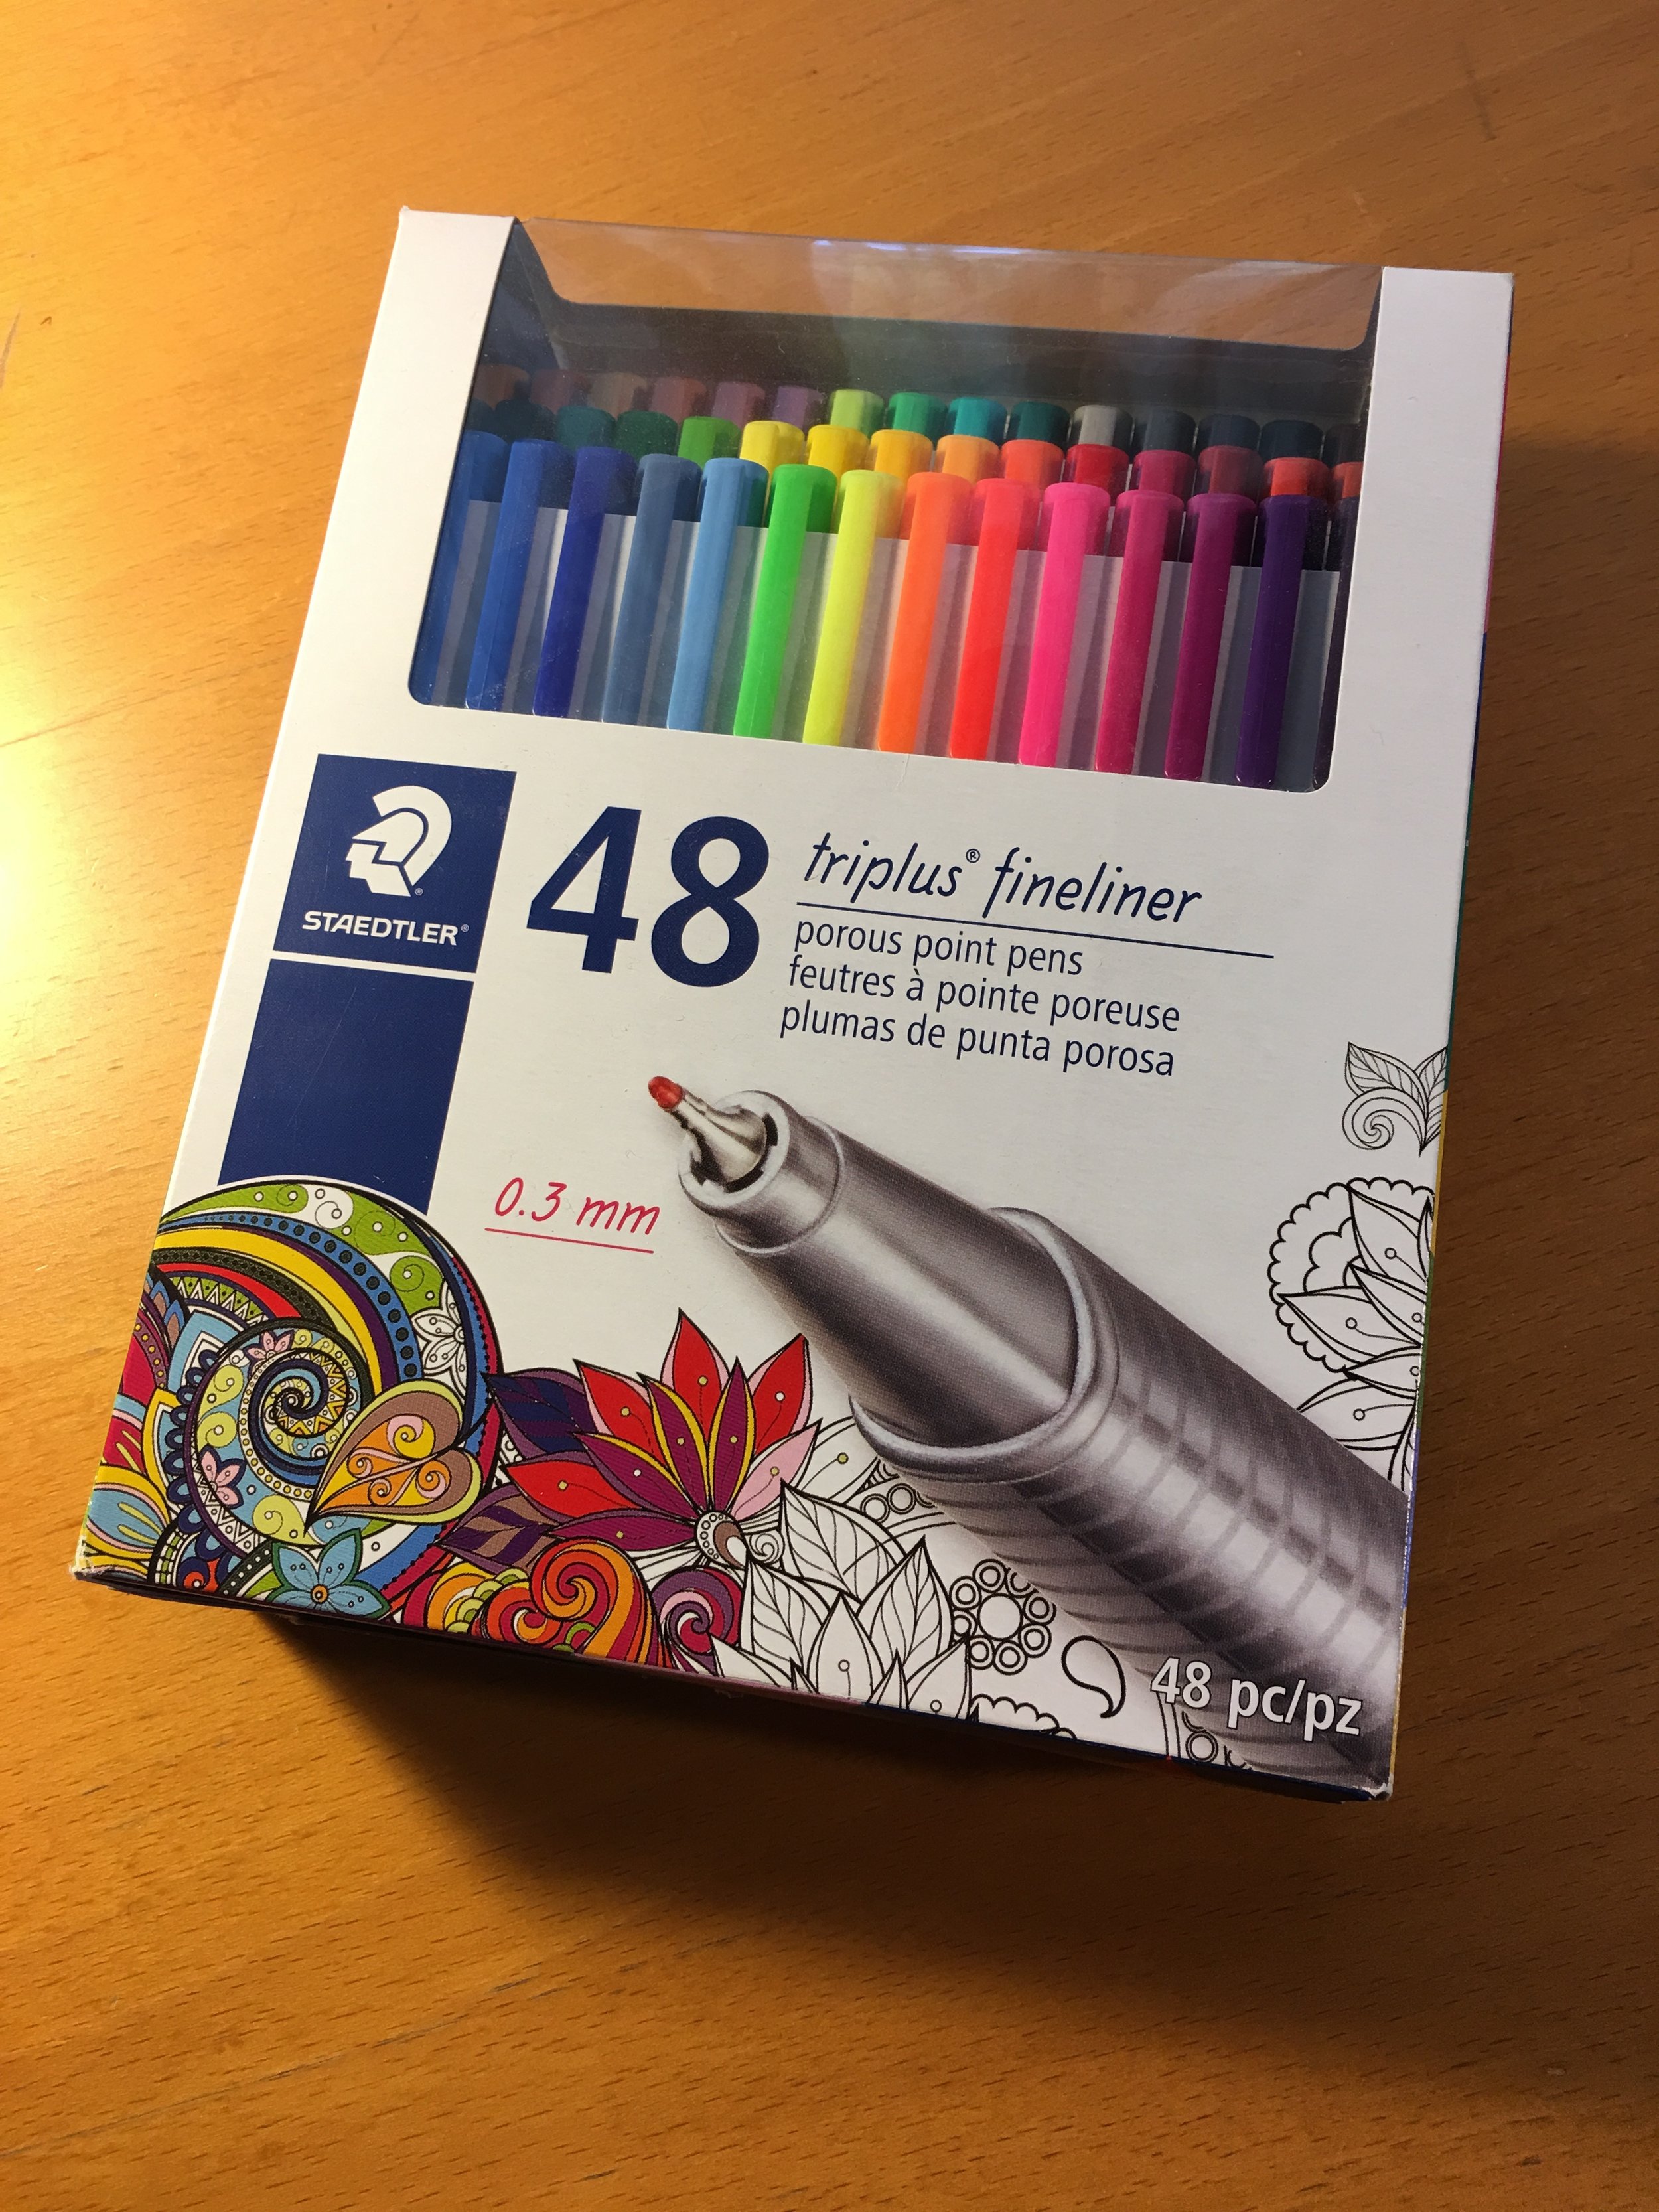 Assorted Colours Details about   0.3mm Triplus Fineliner Pack of 12 Pen Set From Staedtler 